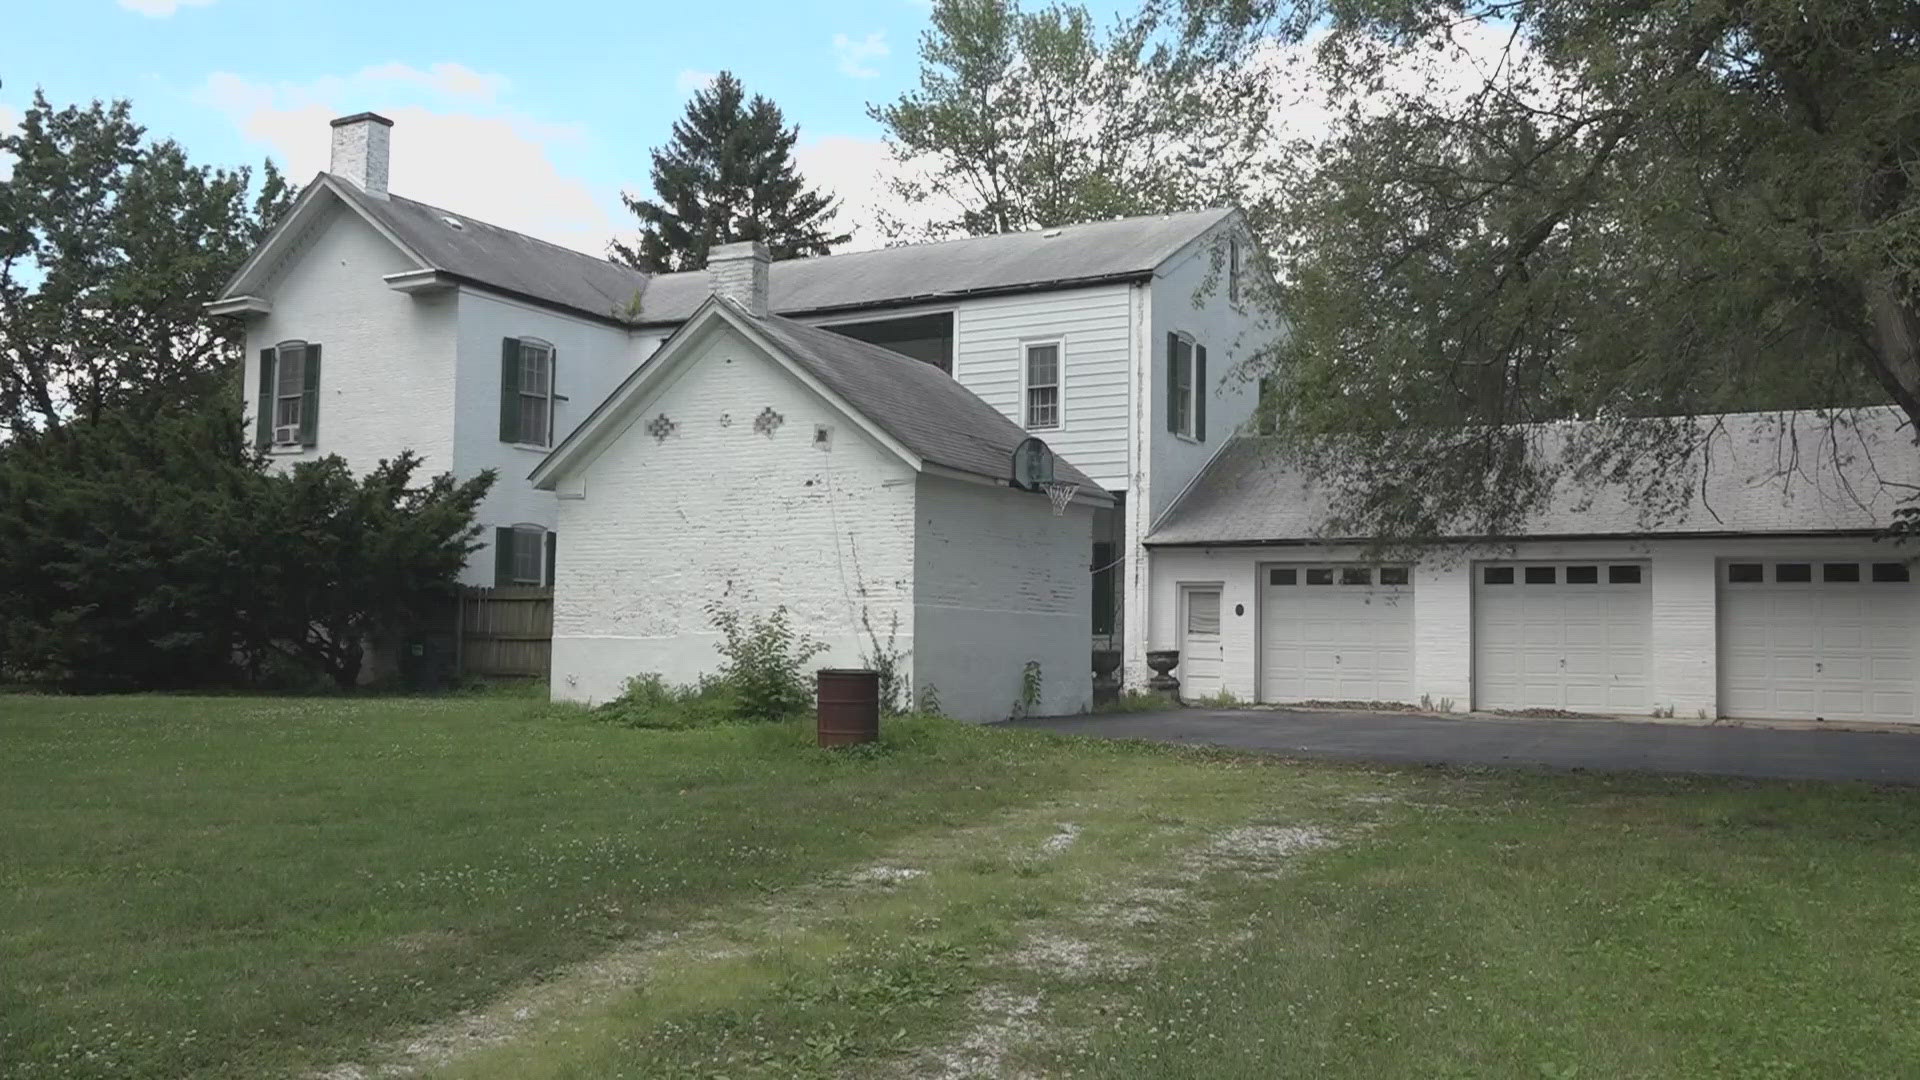 Leaders in St. Clair County plan to purchase a historic mansion in Belleville and turn it into a new community park.